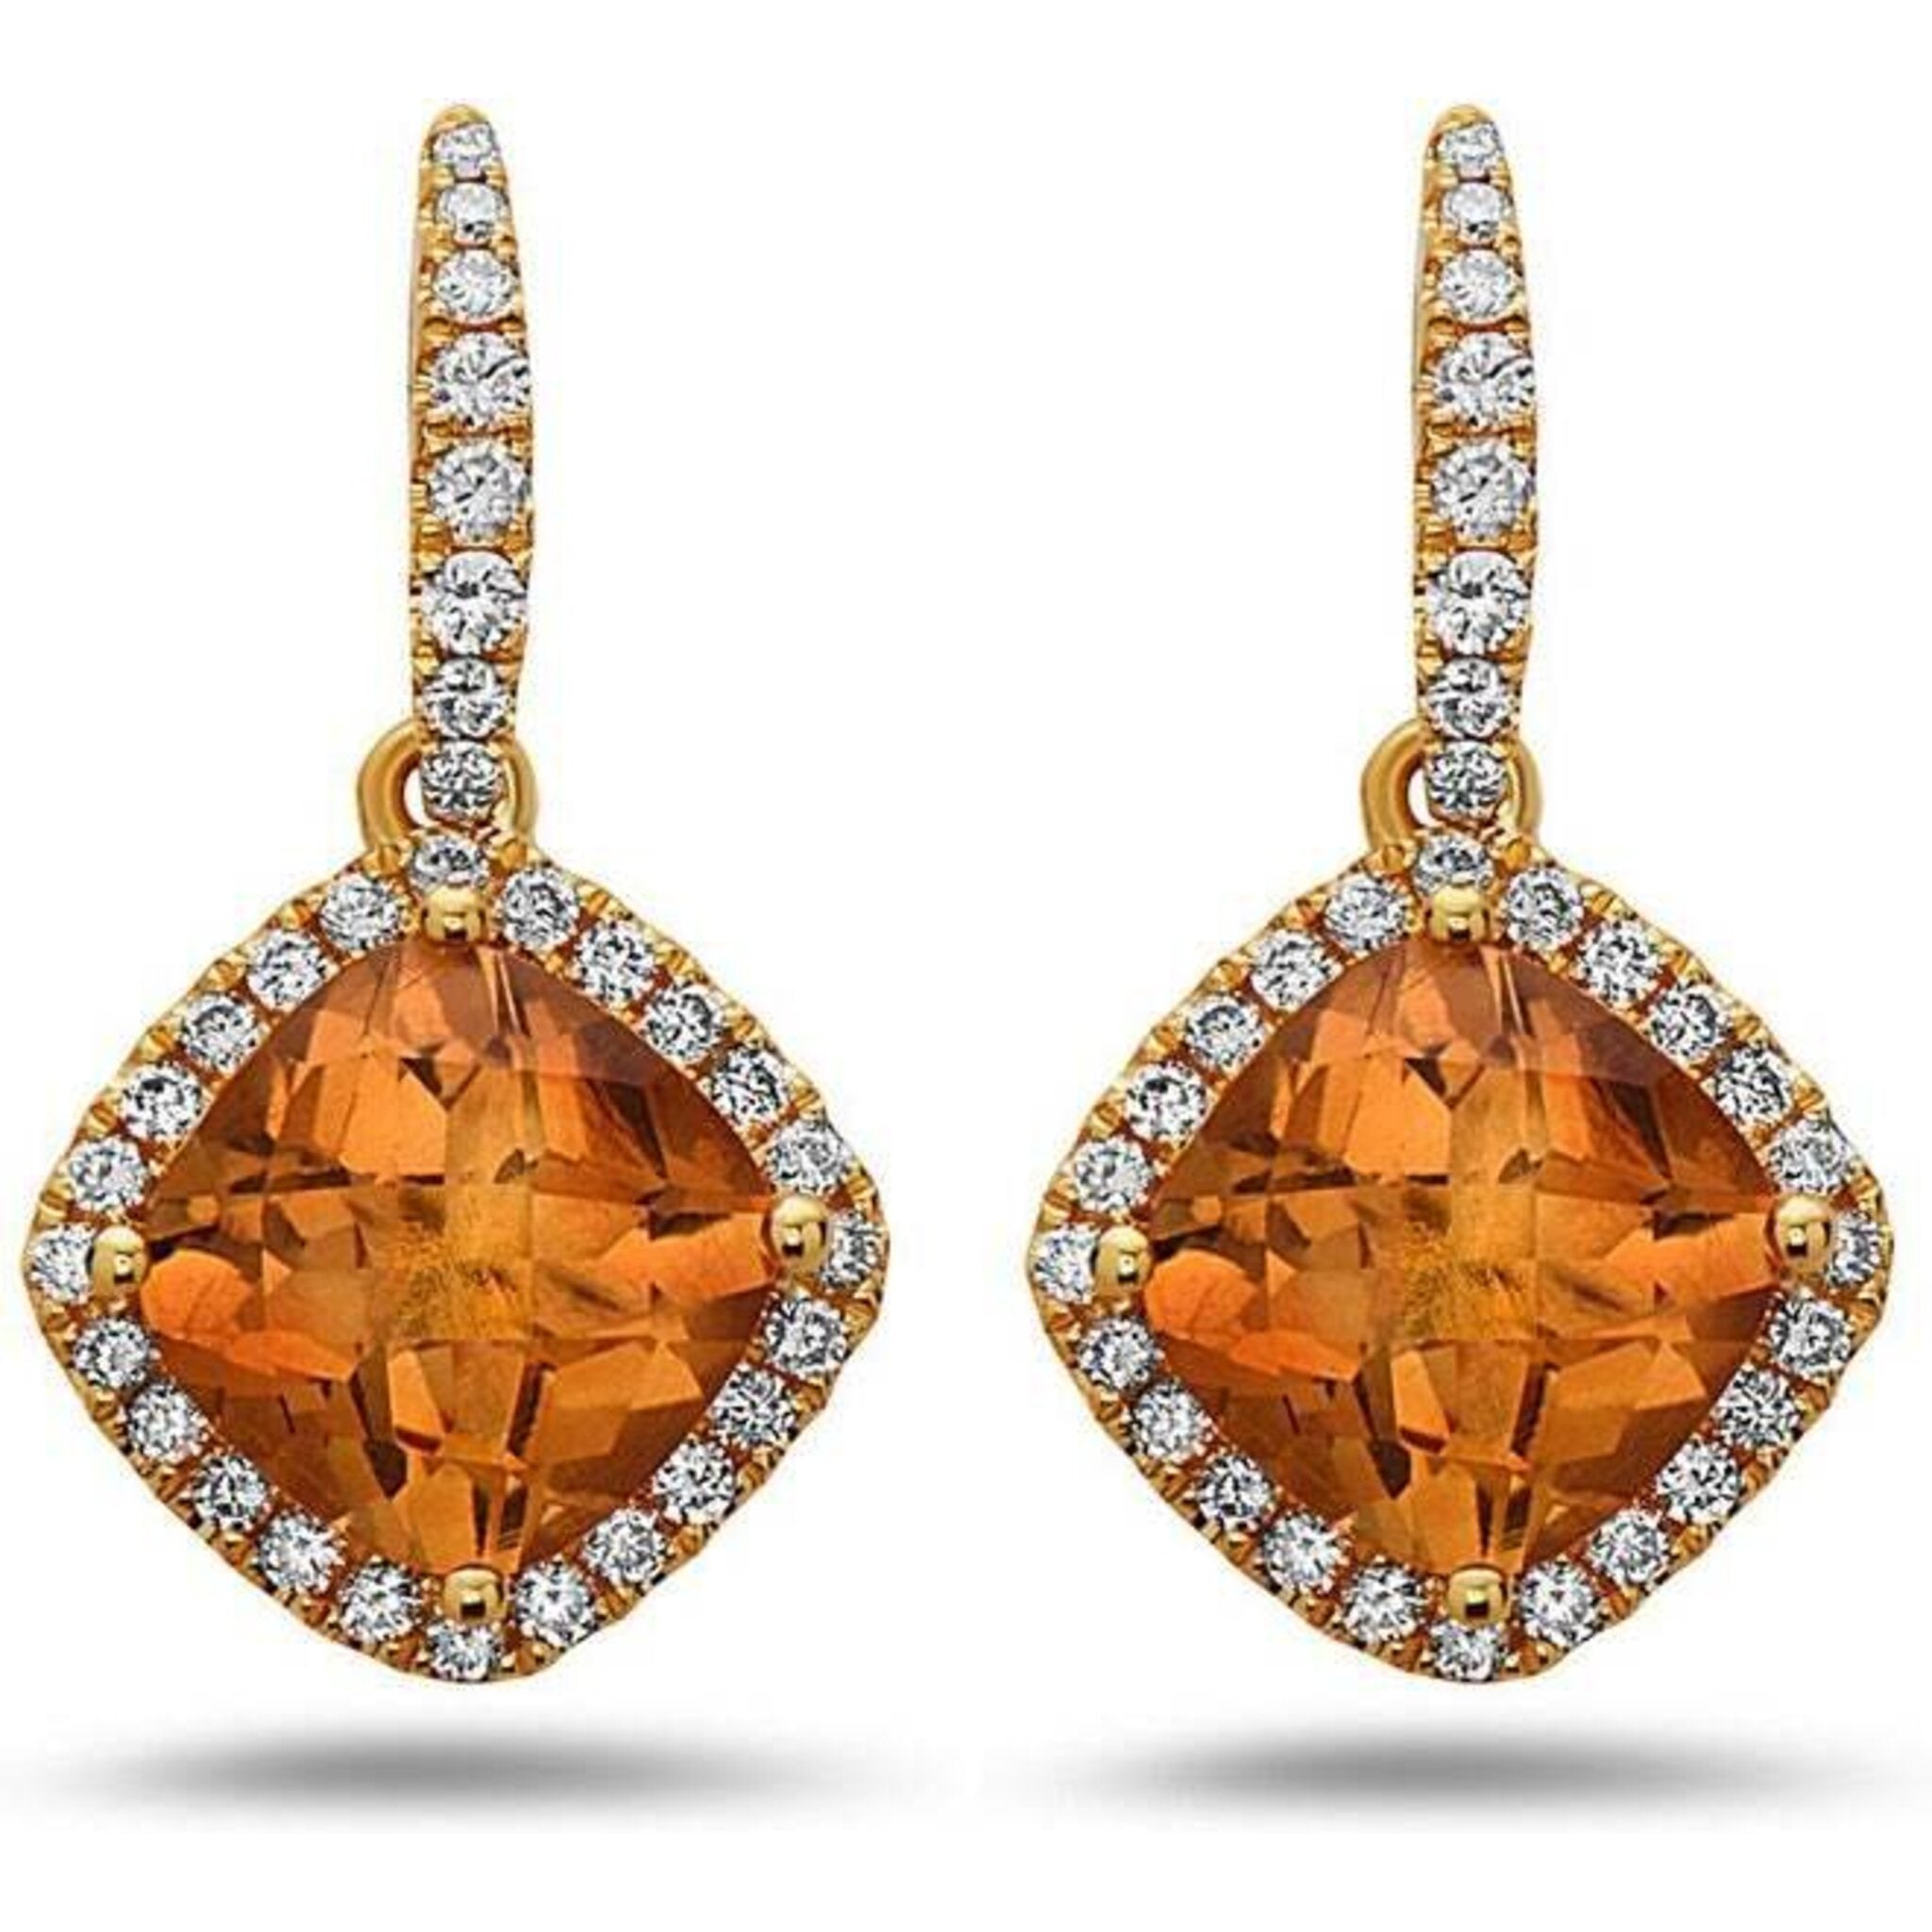 Charles Krypell - Pastel Diamond Angled Cushion Earring - Citrine and Yellow Gold